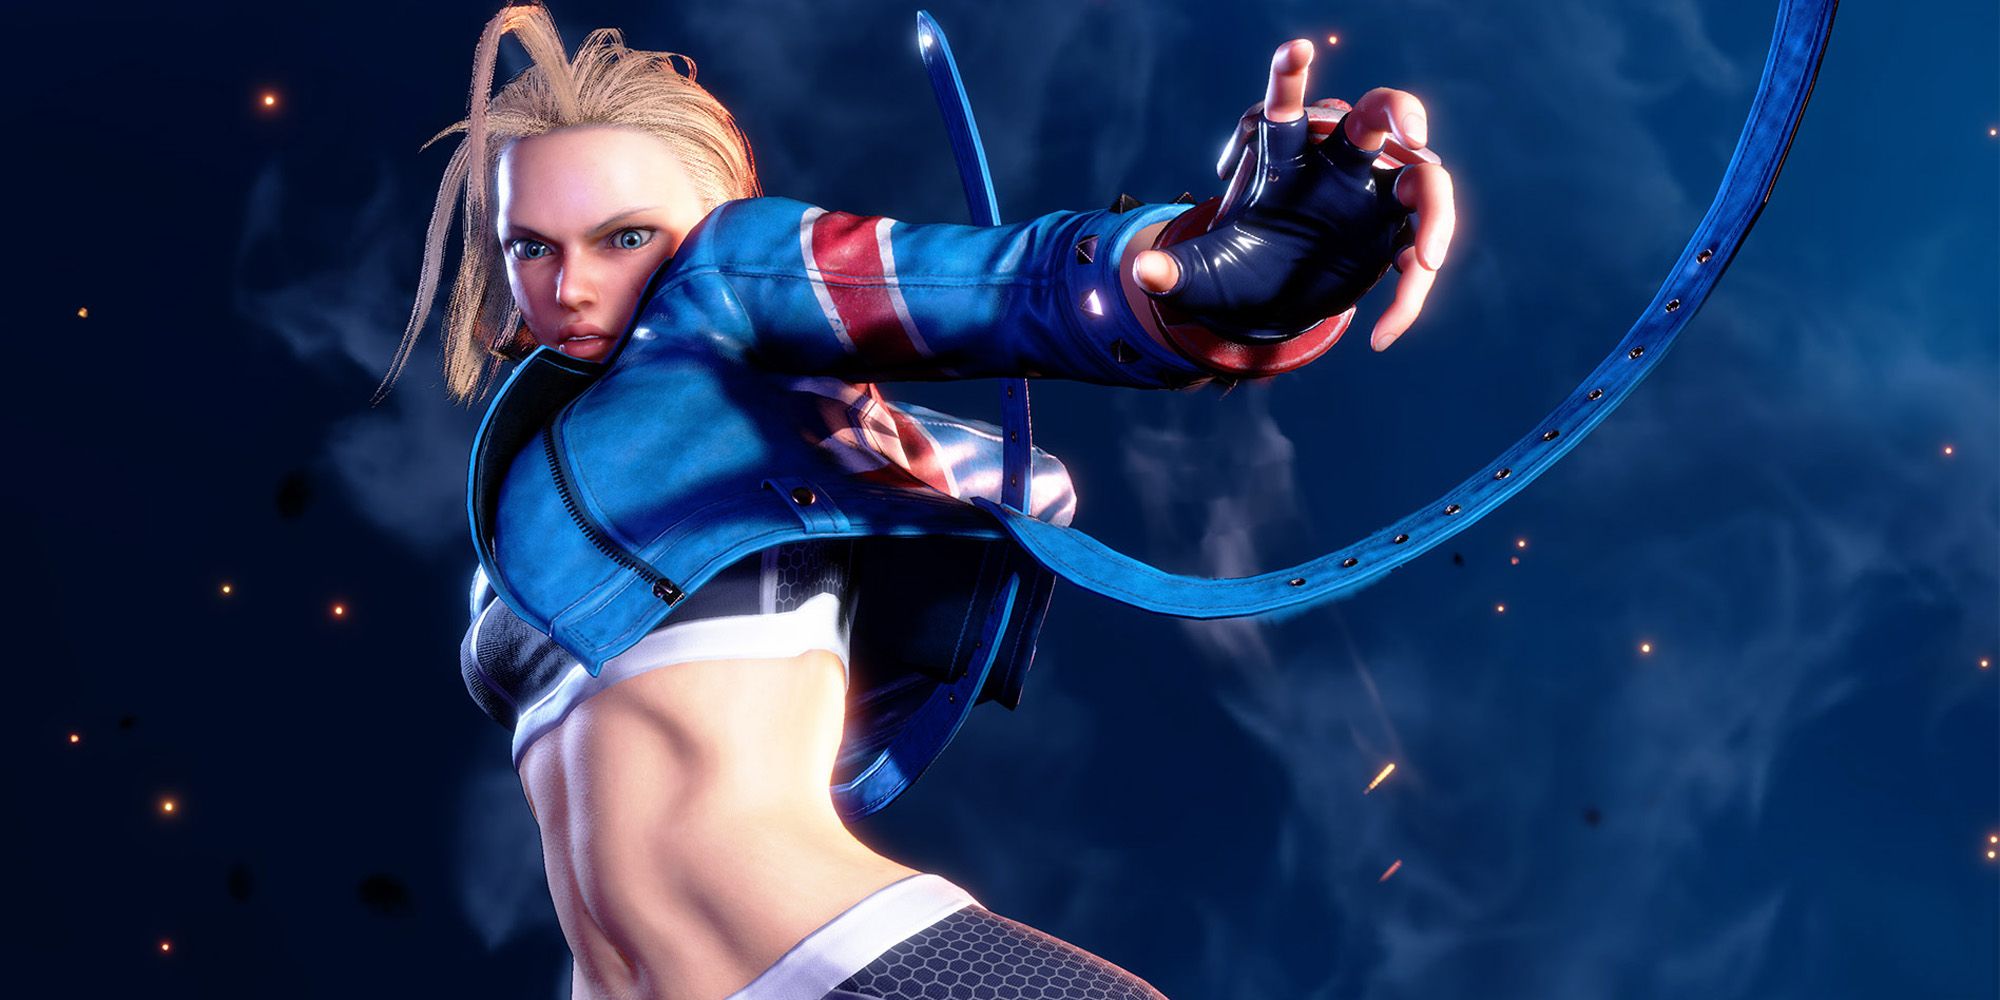 Blonde female Street Fighter 6 character Cammy in a short Union Jack jacket against a blue background.